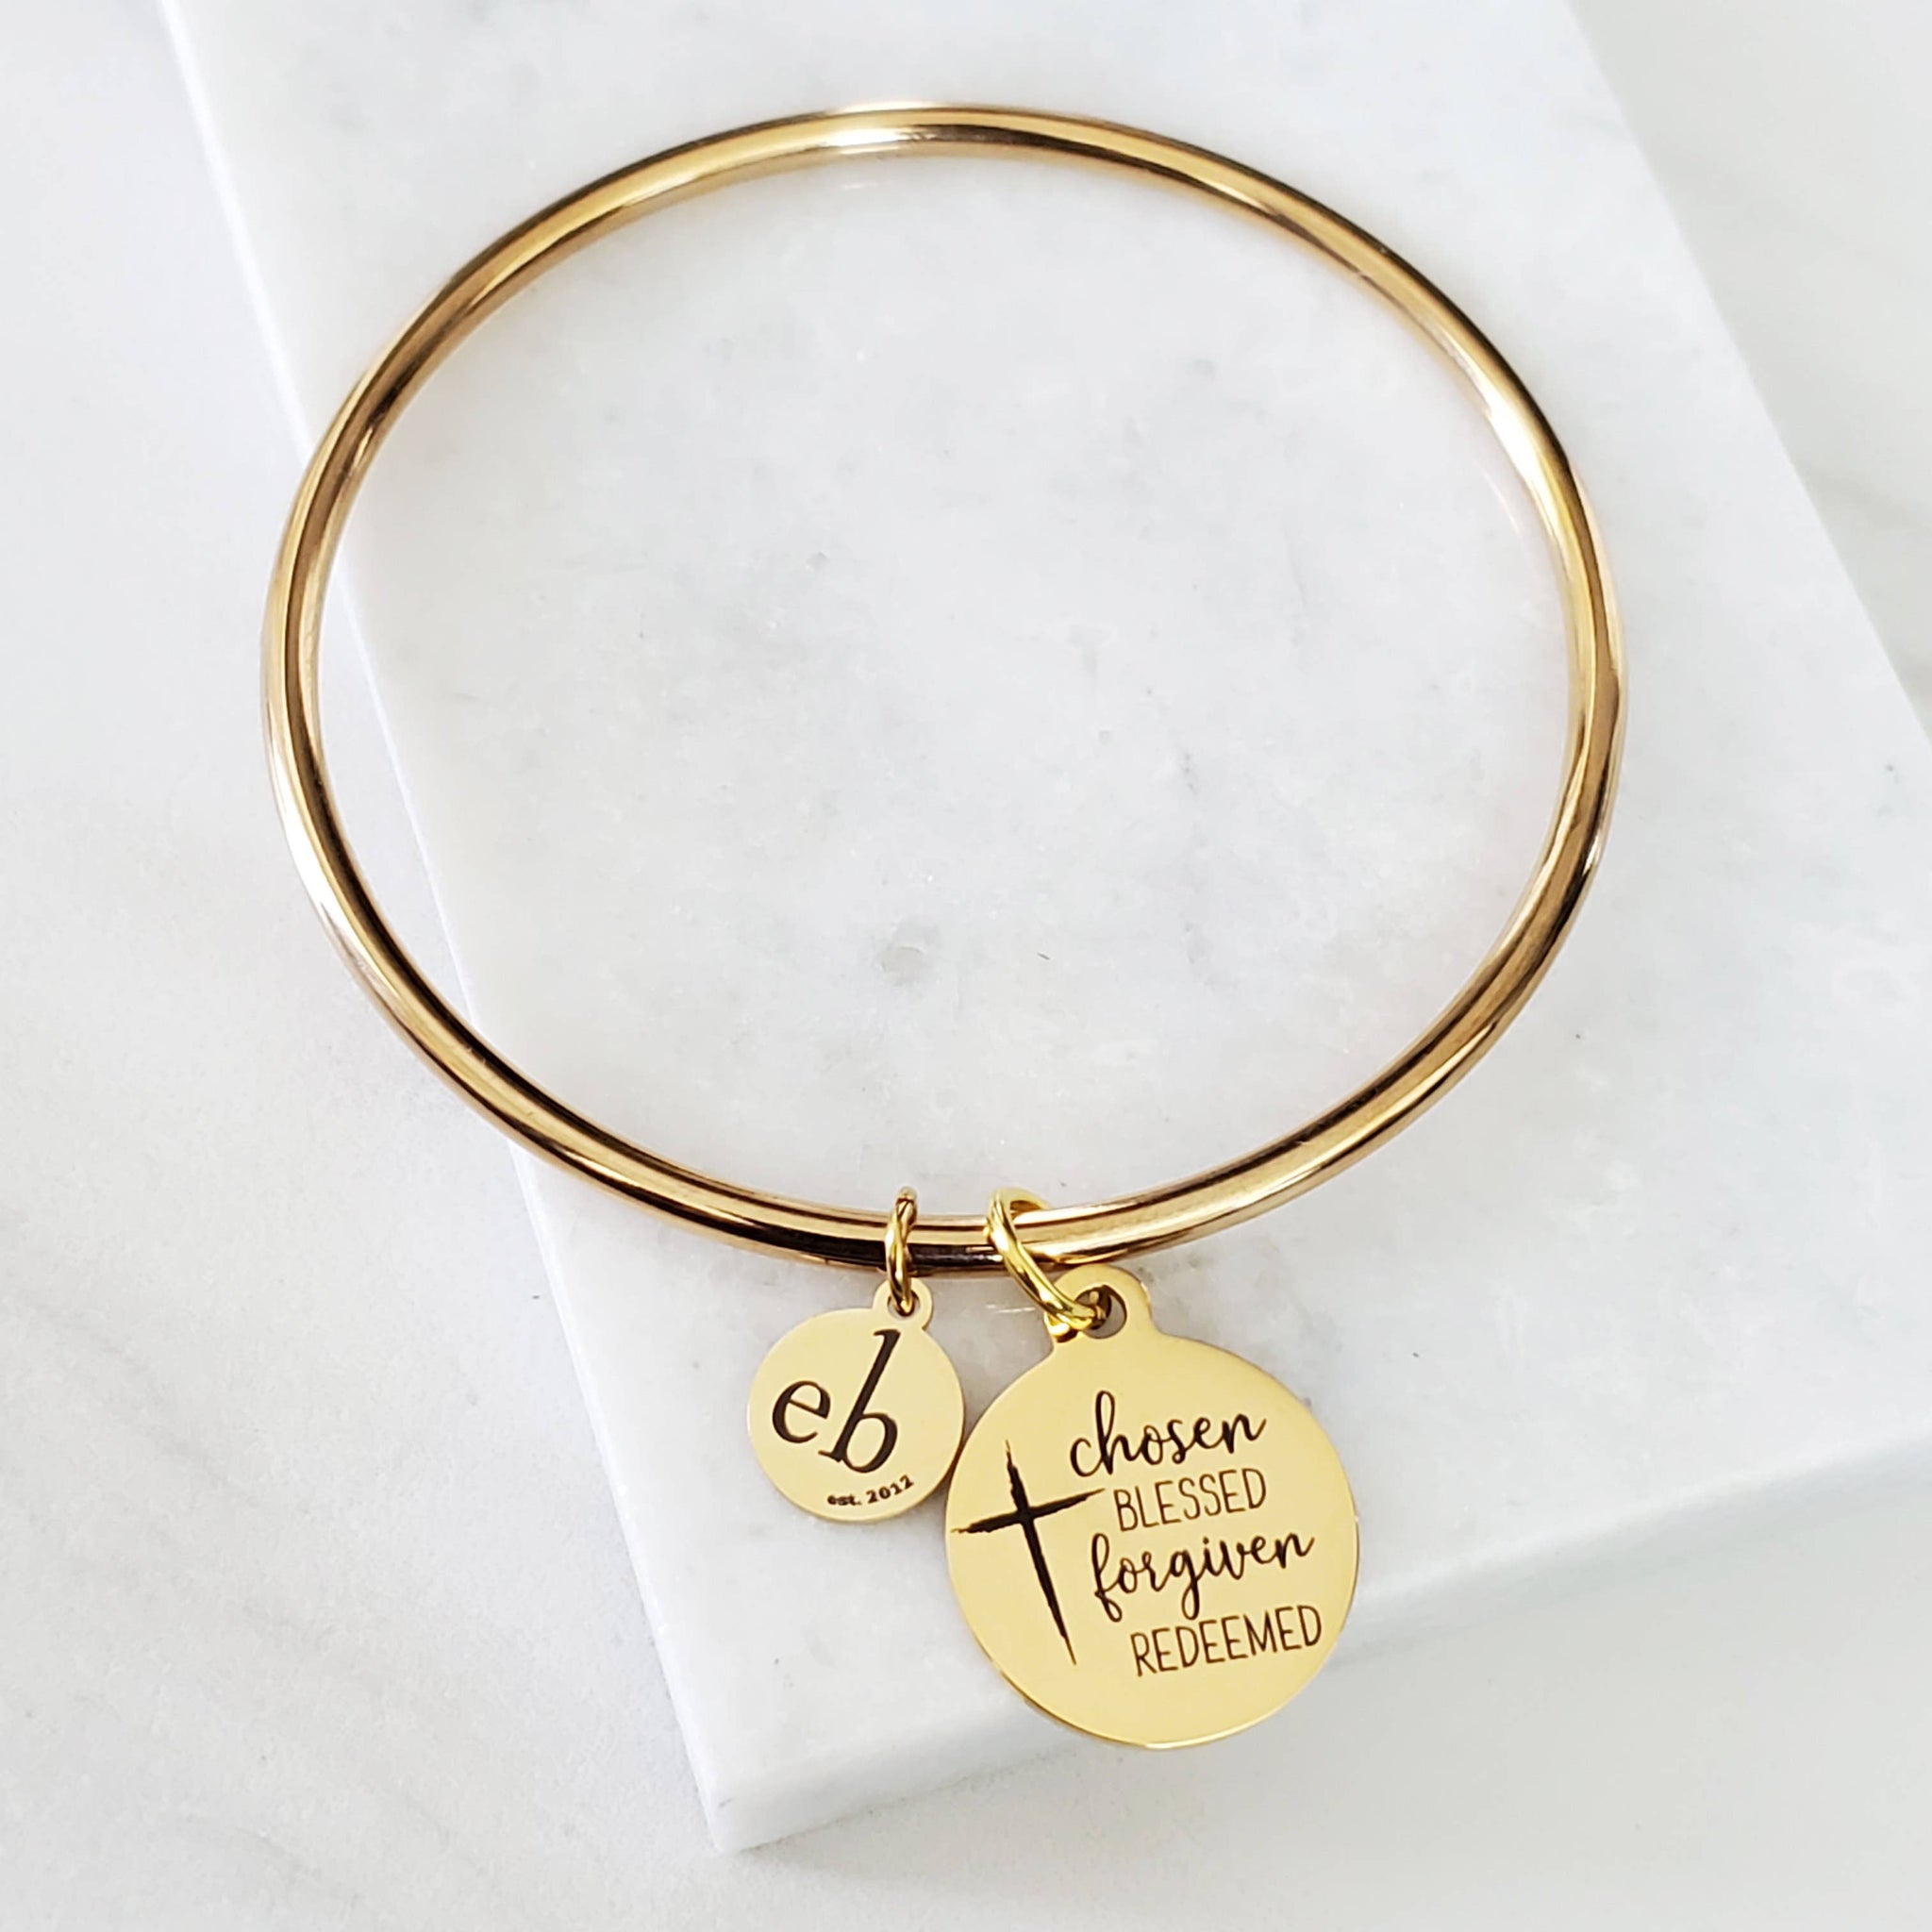 Chosen Blessed Forgiven Redeemed Religious Gold Charm Bangle